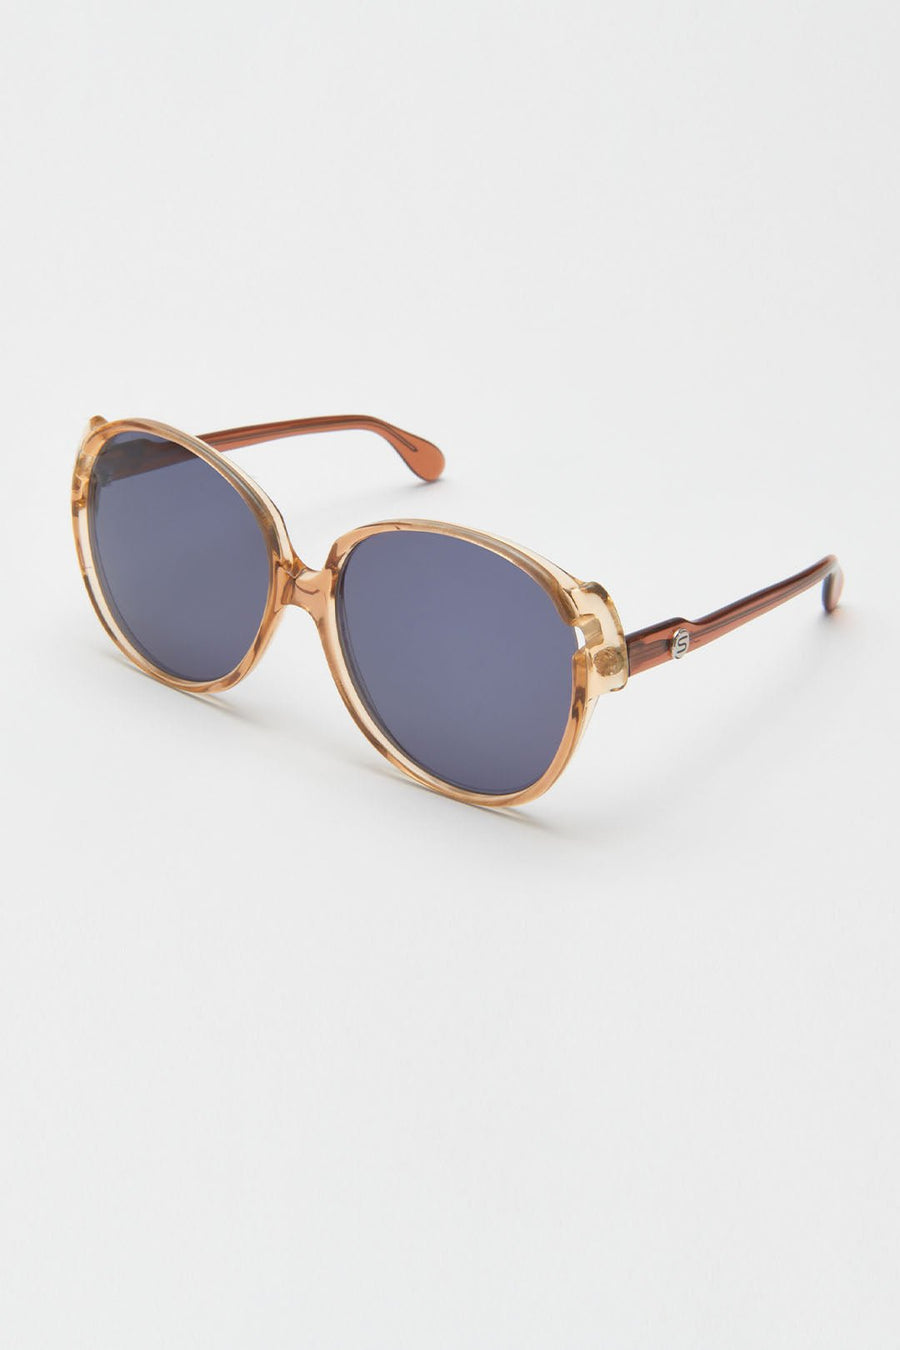 VINTAGE SILHOUETTE OVERSIZED SUNGLASSES, BROWN - Burning Torch Online Boutique